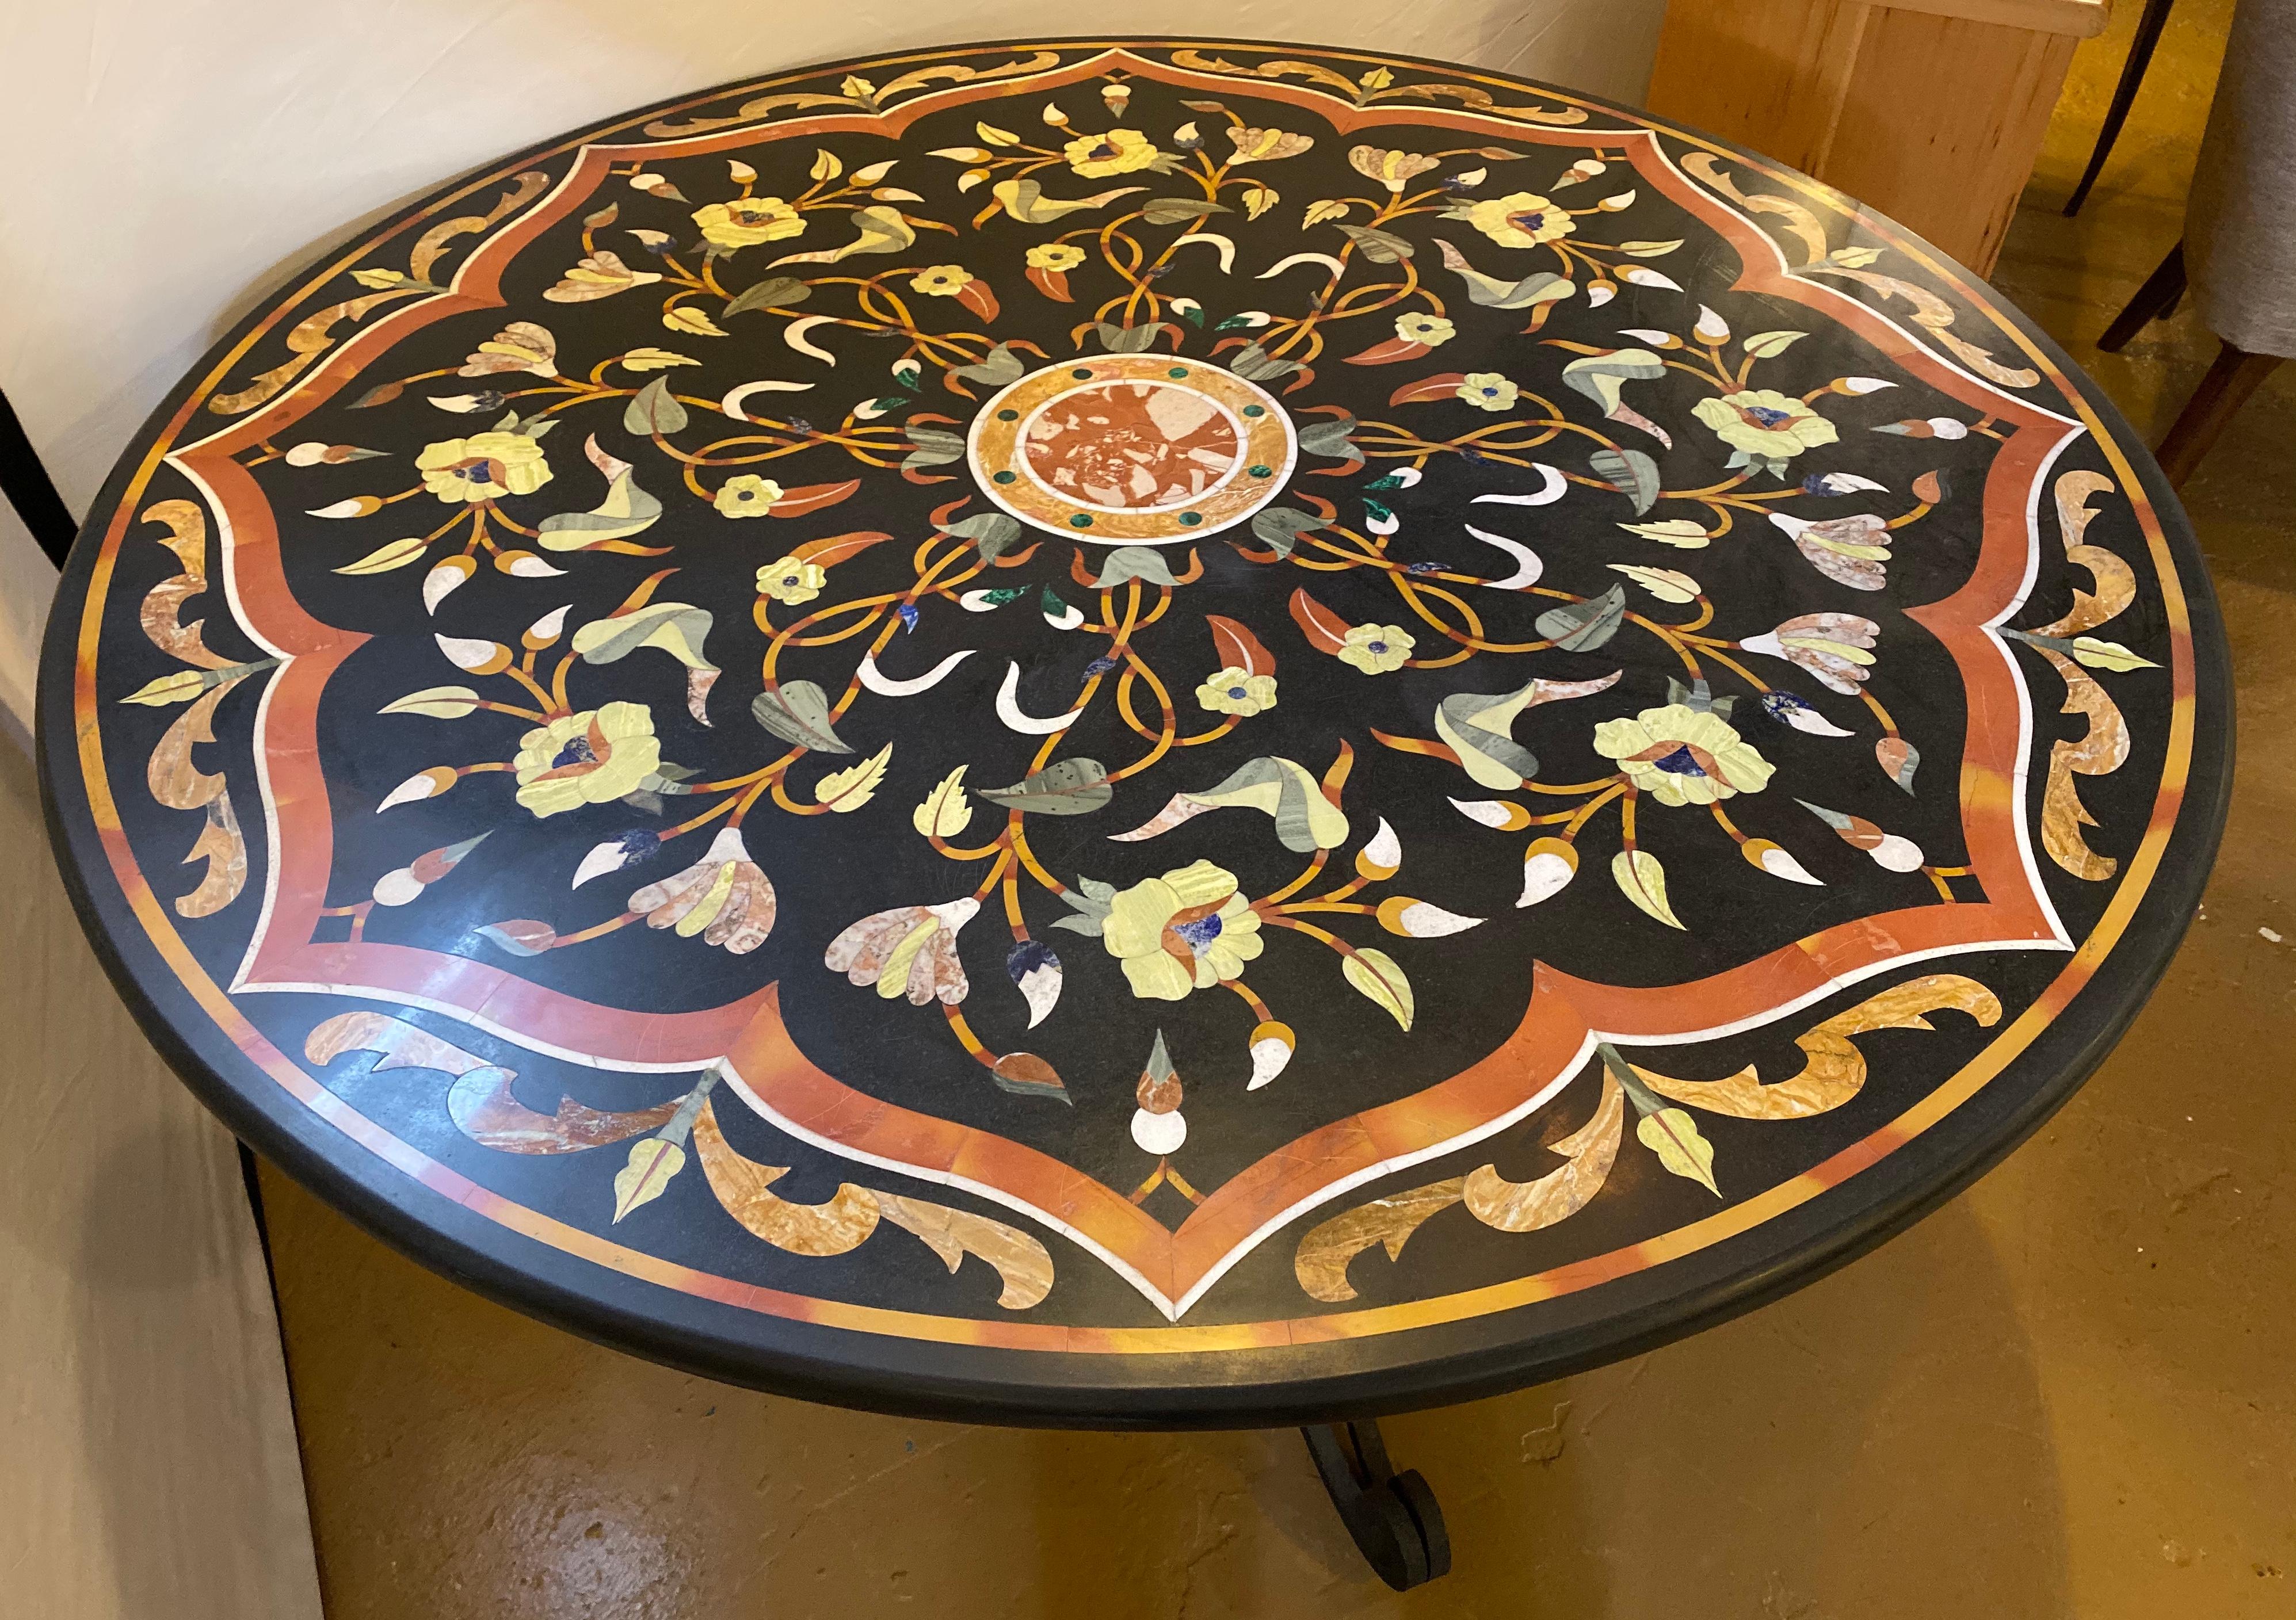 Arts and Crafts Pietra Dura Stone Inlaid Round Center Dining Table, Wrought Iron Base Antique